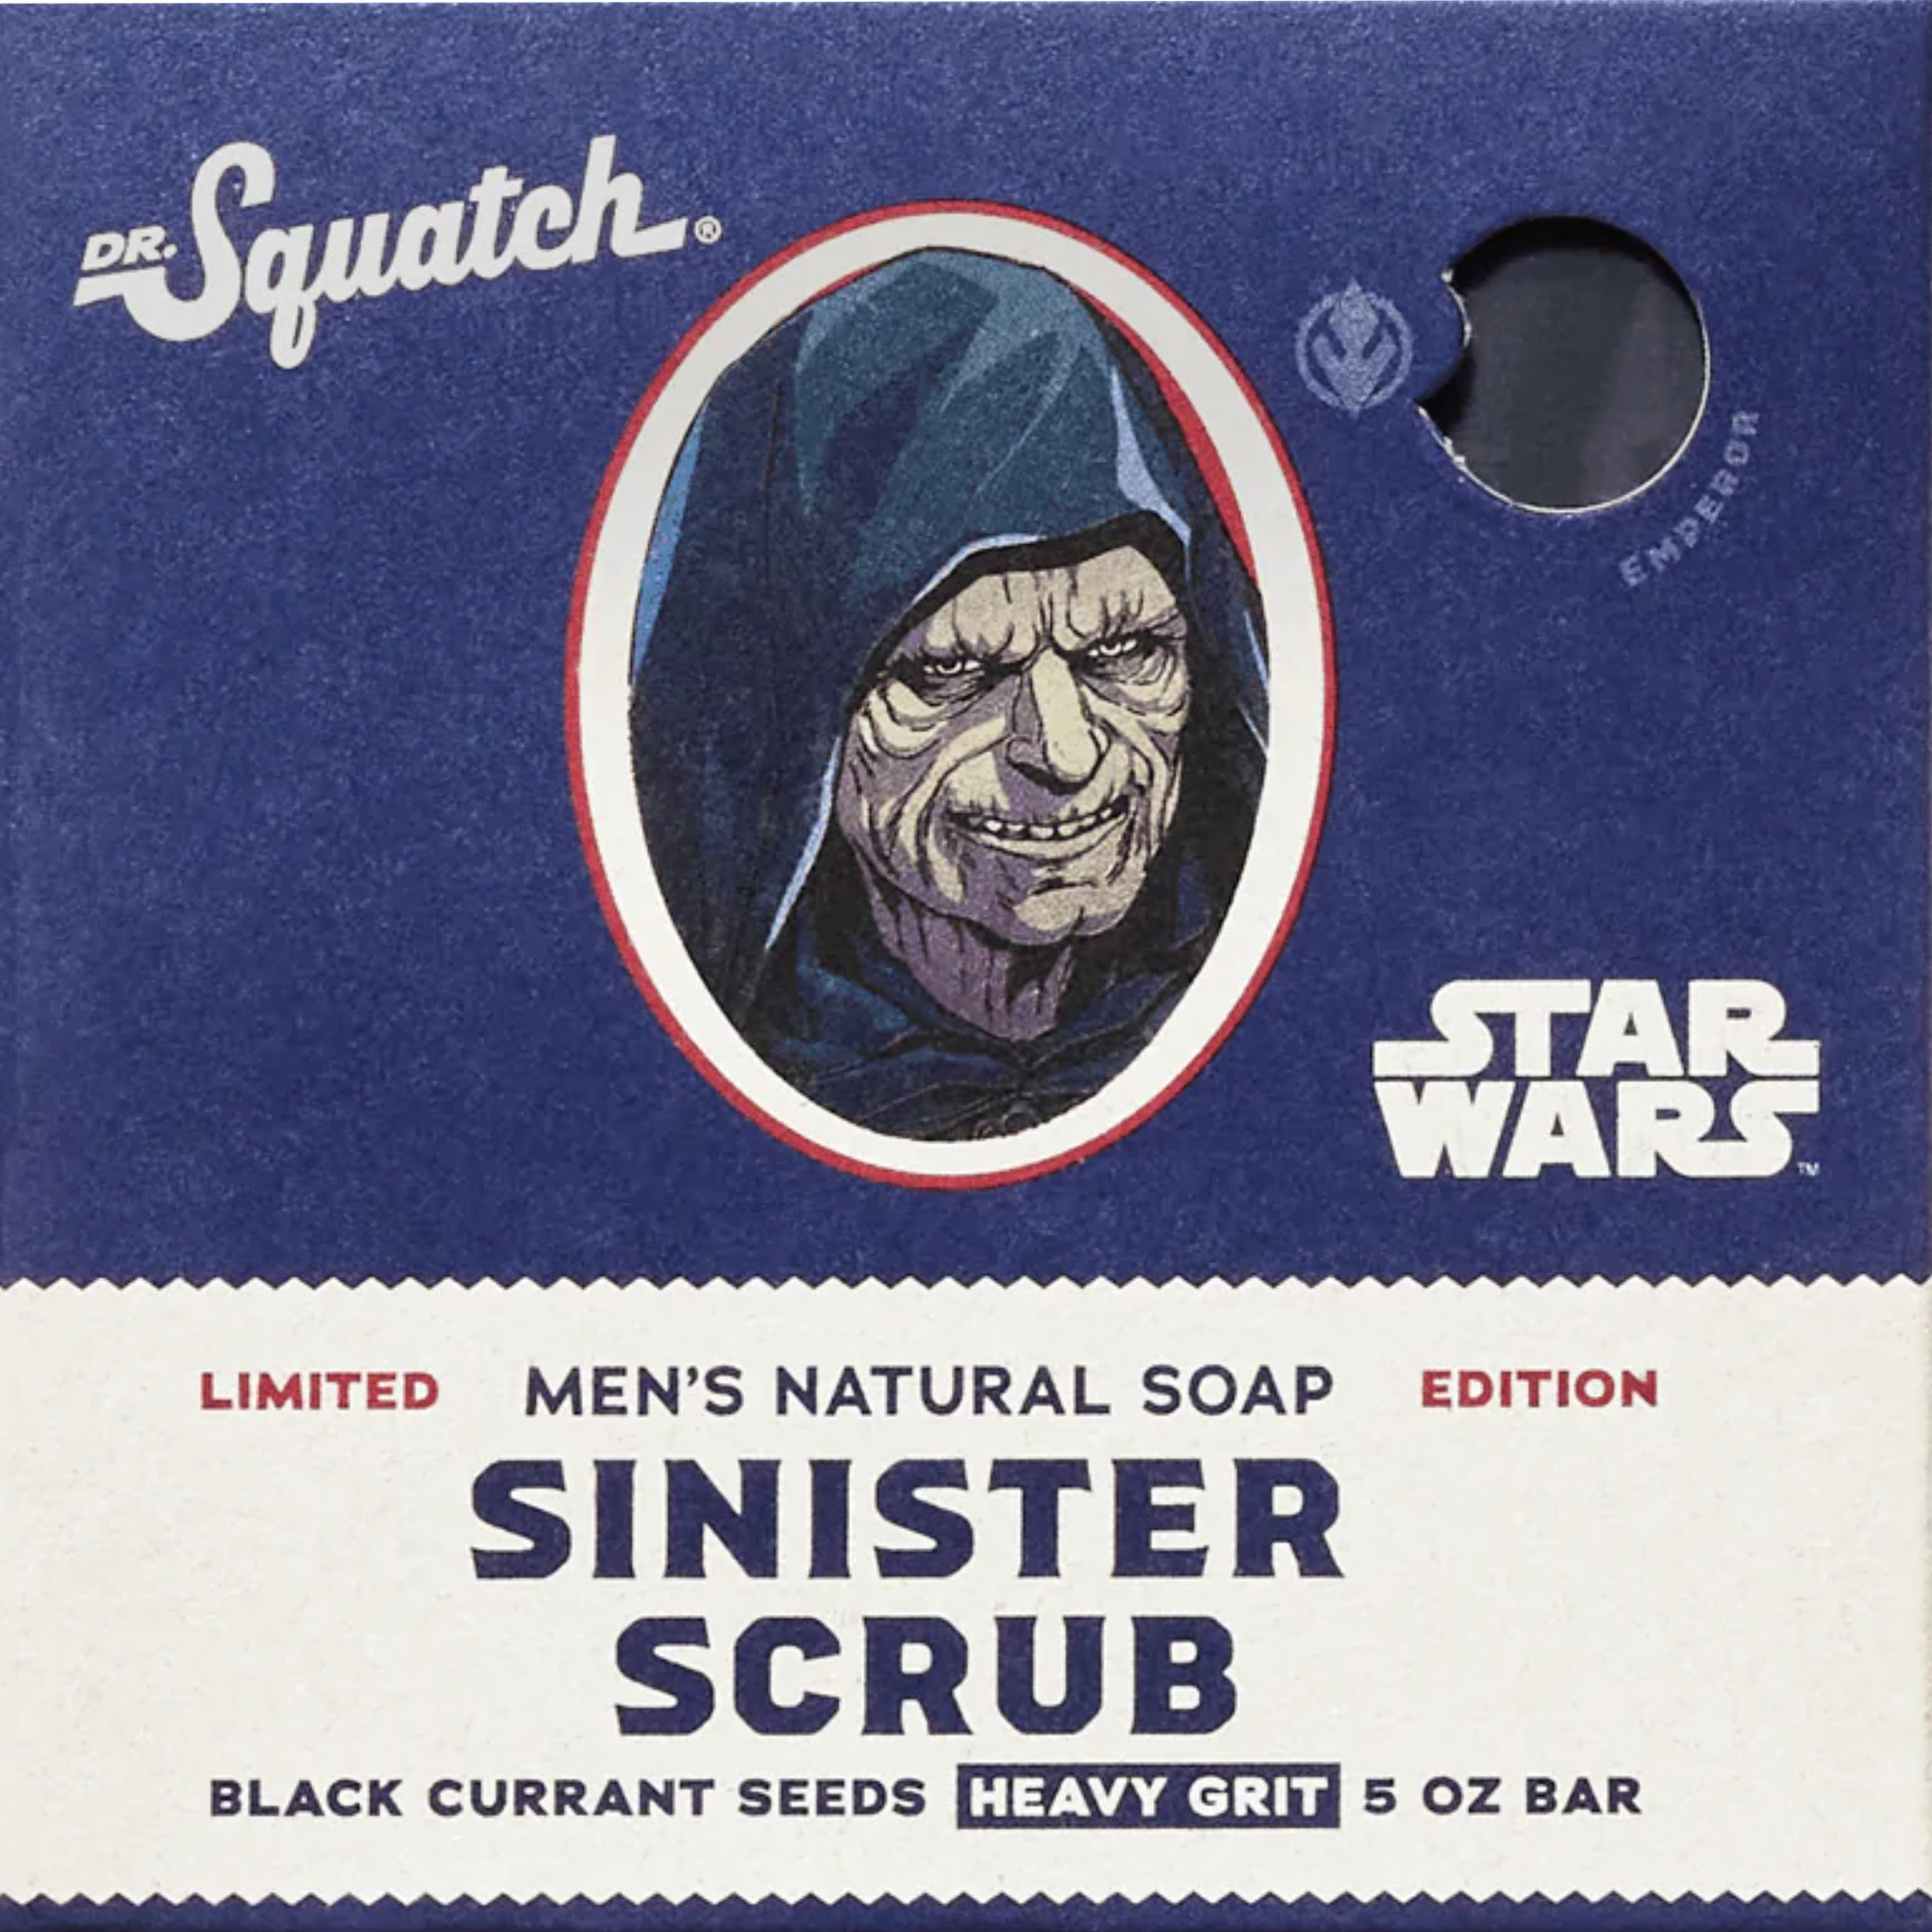 Choose Your Destiny” with Star Wars Themed Soap from Dr. Squatch – Star Wars  Reporter